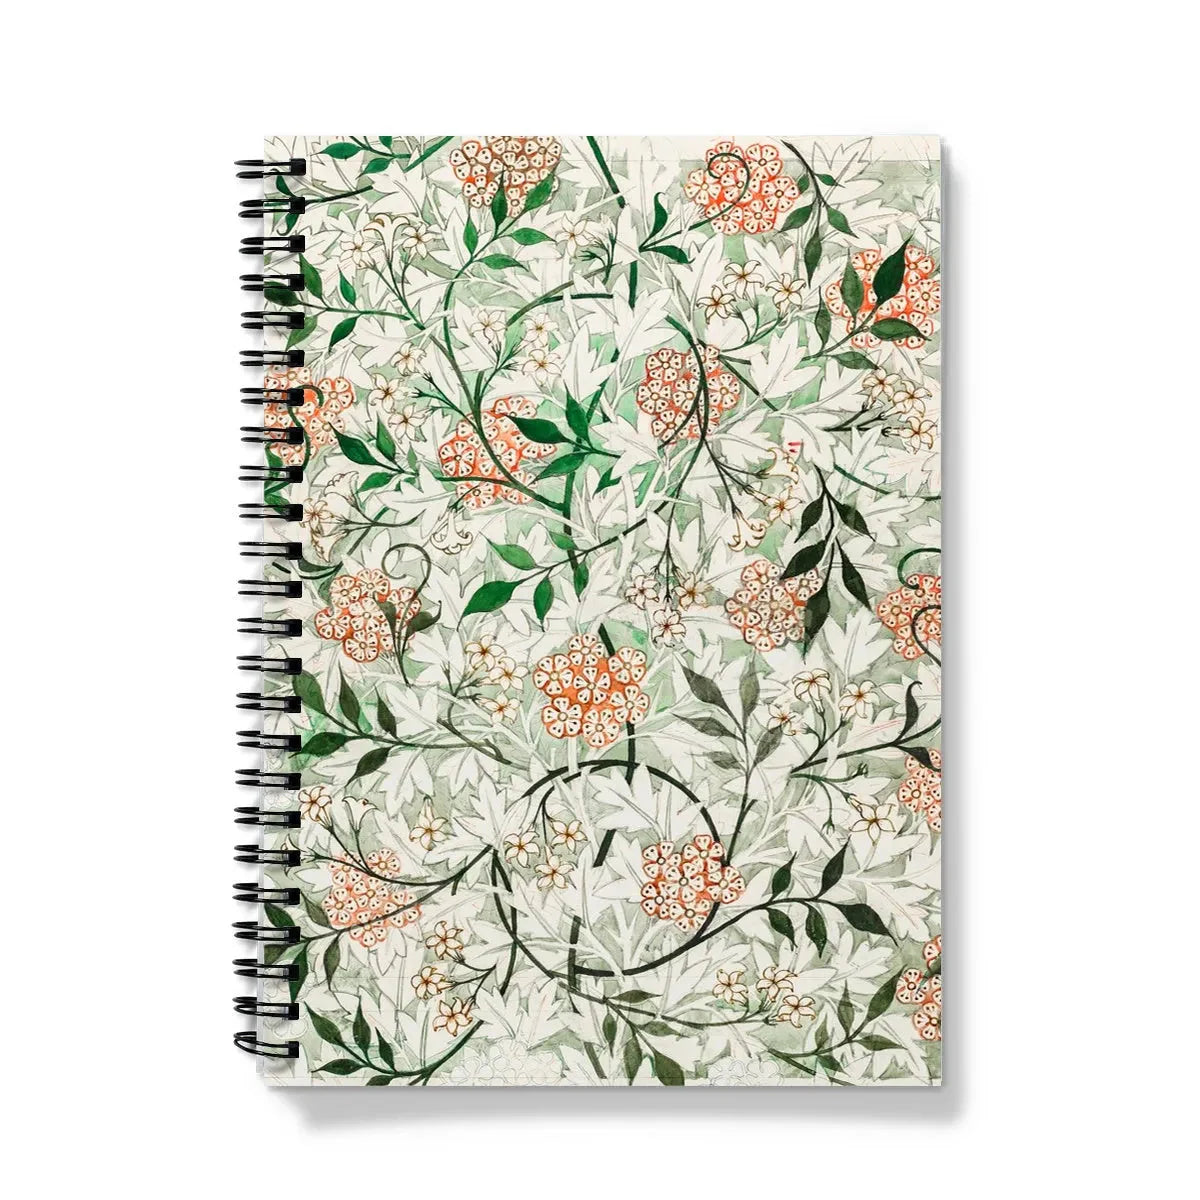 Jasmine By William Morris Notebook - A5 - Graph Paper - Notebooks & Notepads - Aesthetic Art